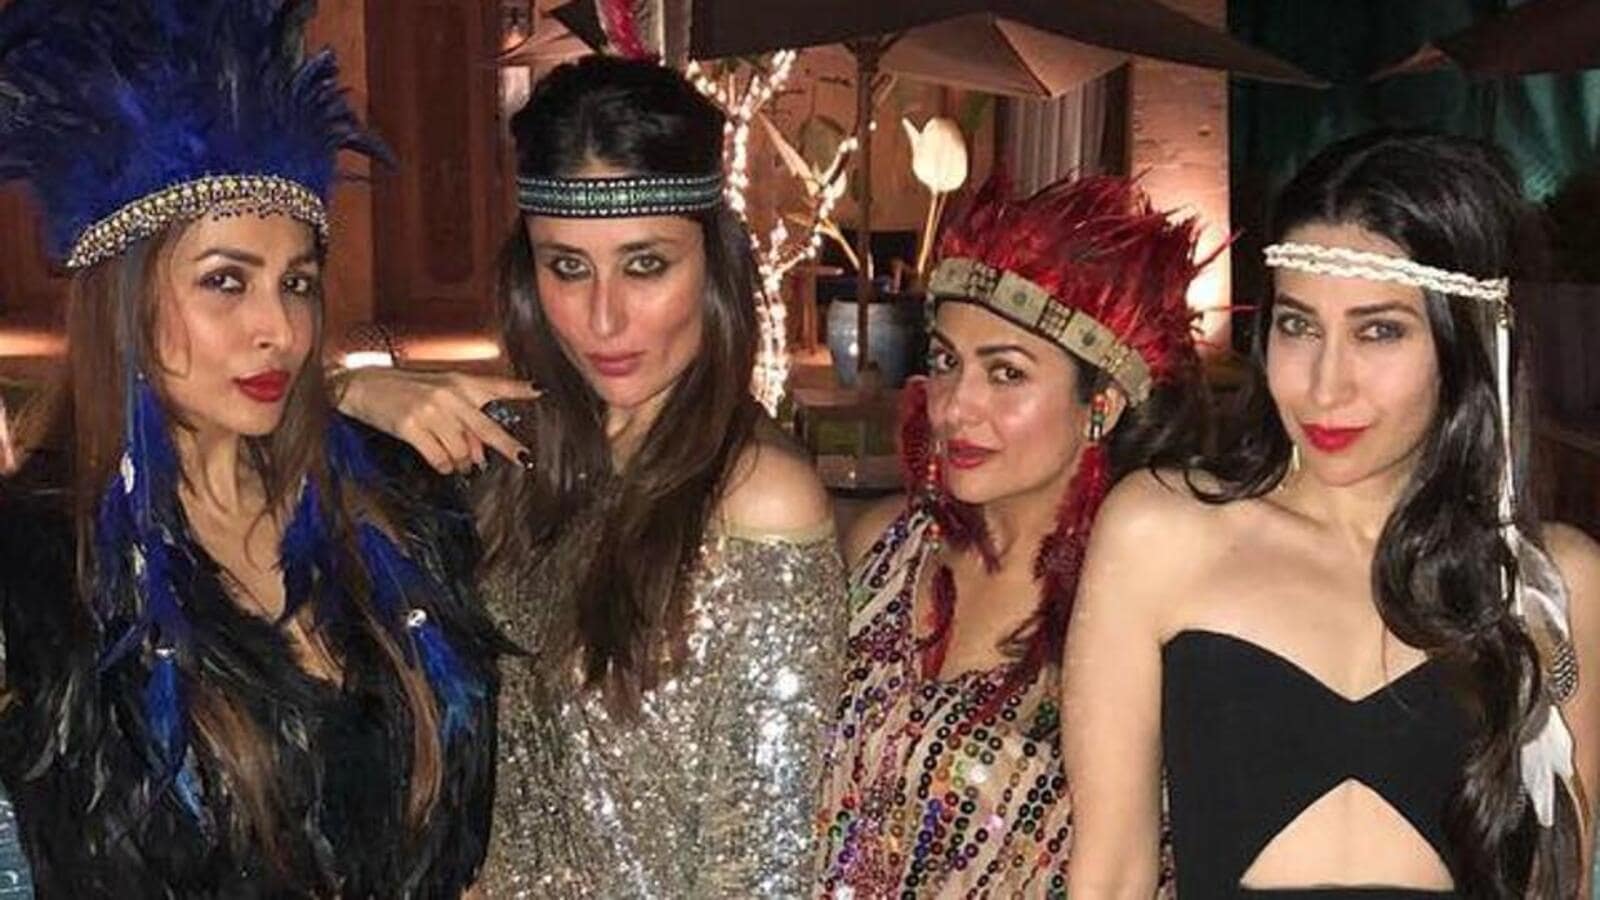 Friendship Day special | Kareena Kapoor Khan on her ‘guts gang’: Lolo is most shy, Malaika most adventurous